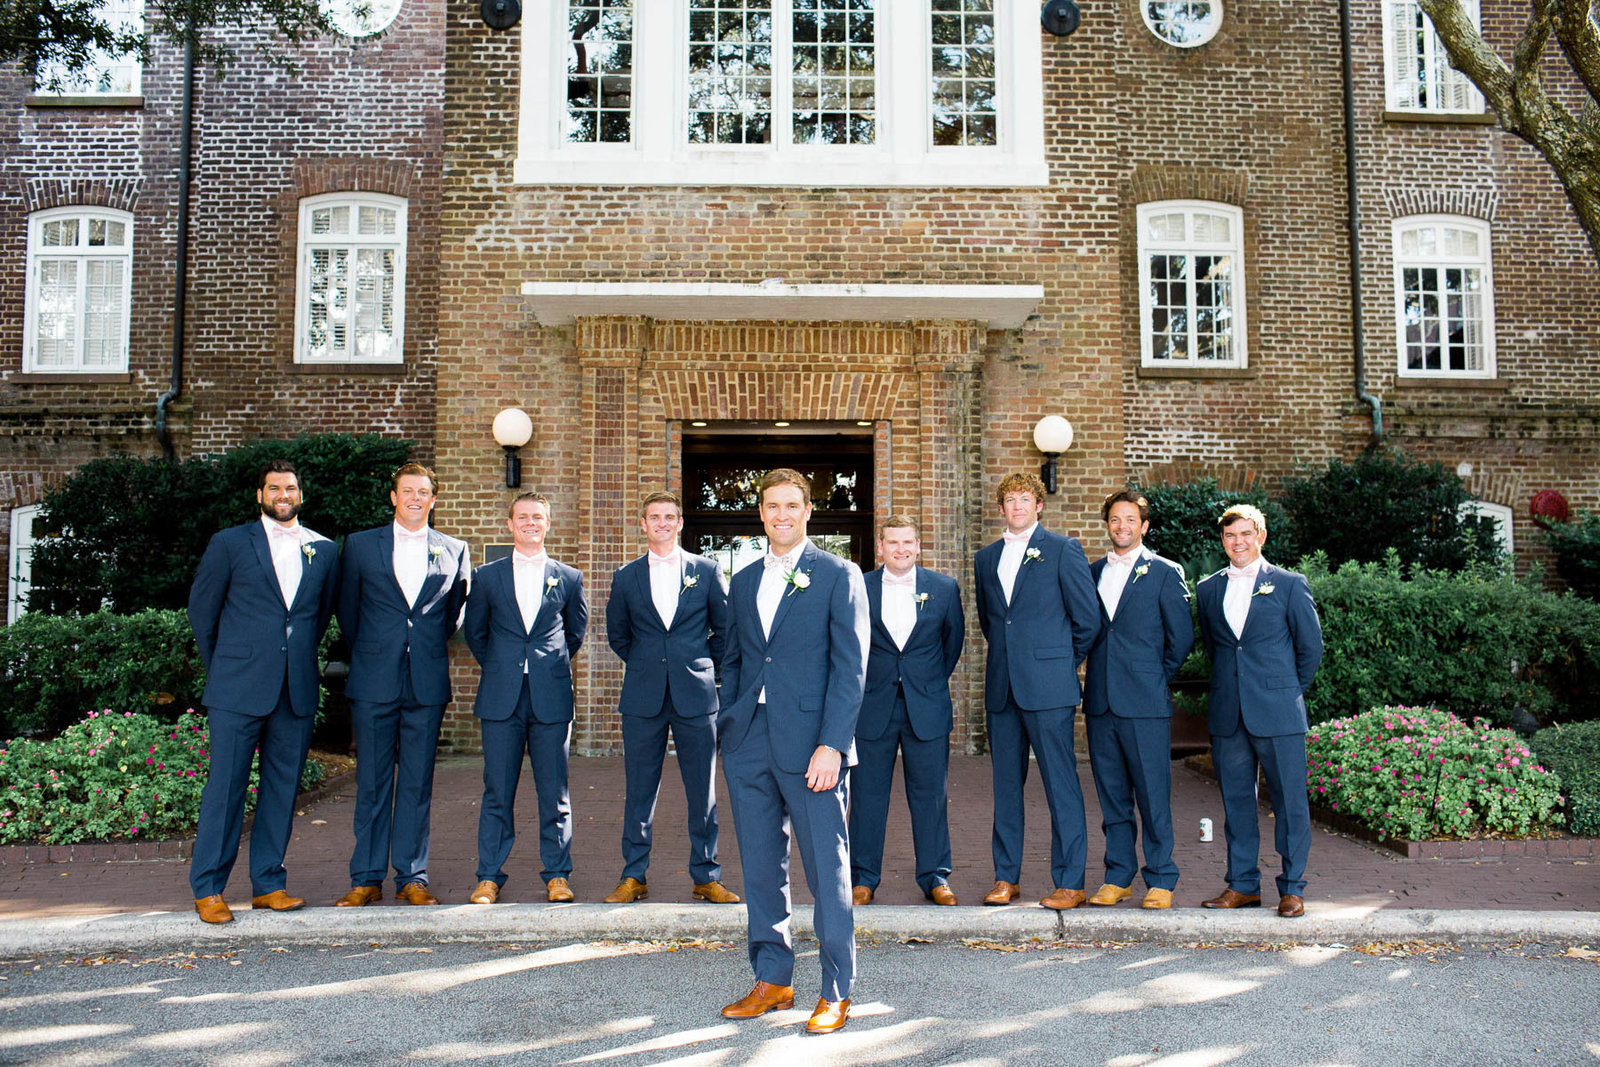 Groomsmen line up in front of the Rice Mill Building, Charleston, South Carolina